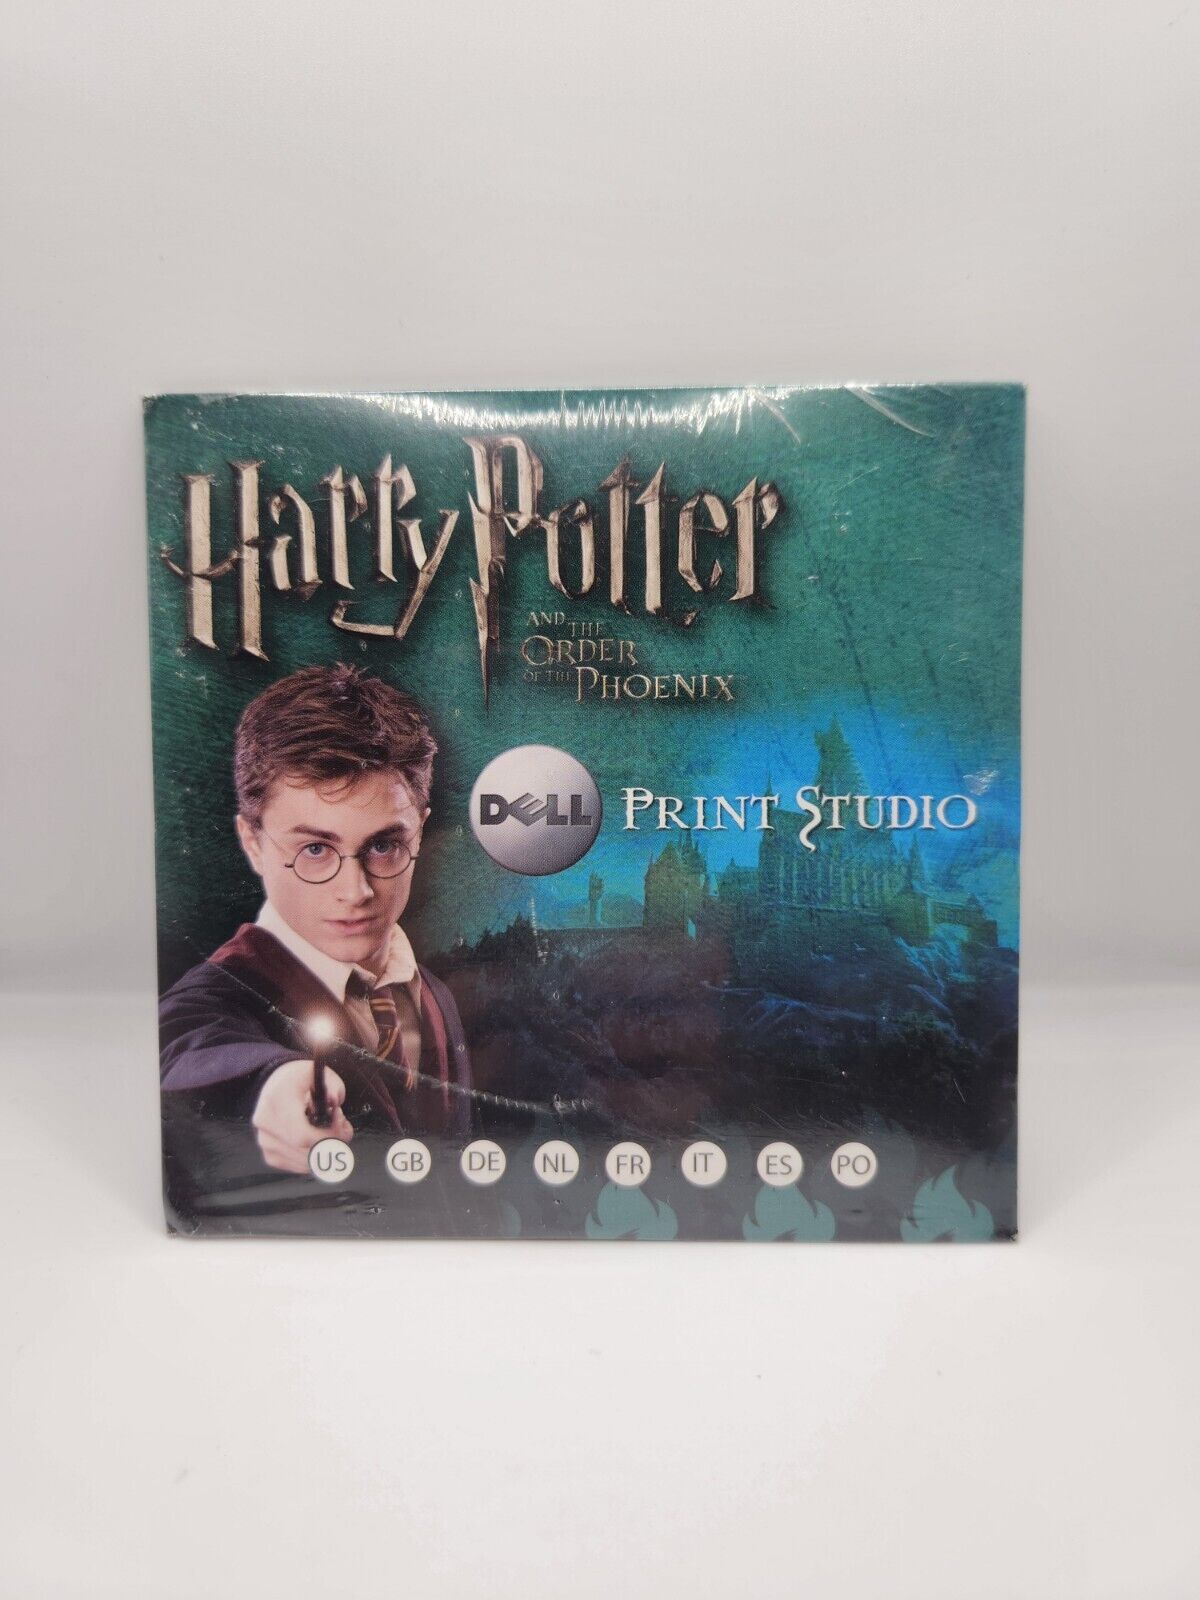 Harry Potter Order of the Phoenix Dell Print Studio CD Factory Sealed PC CD Rom